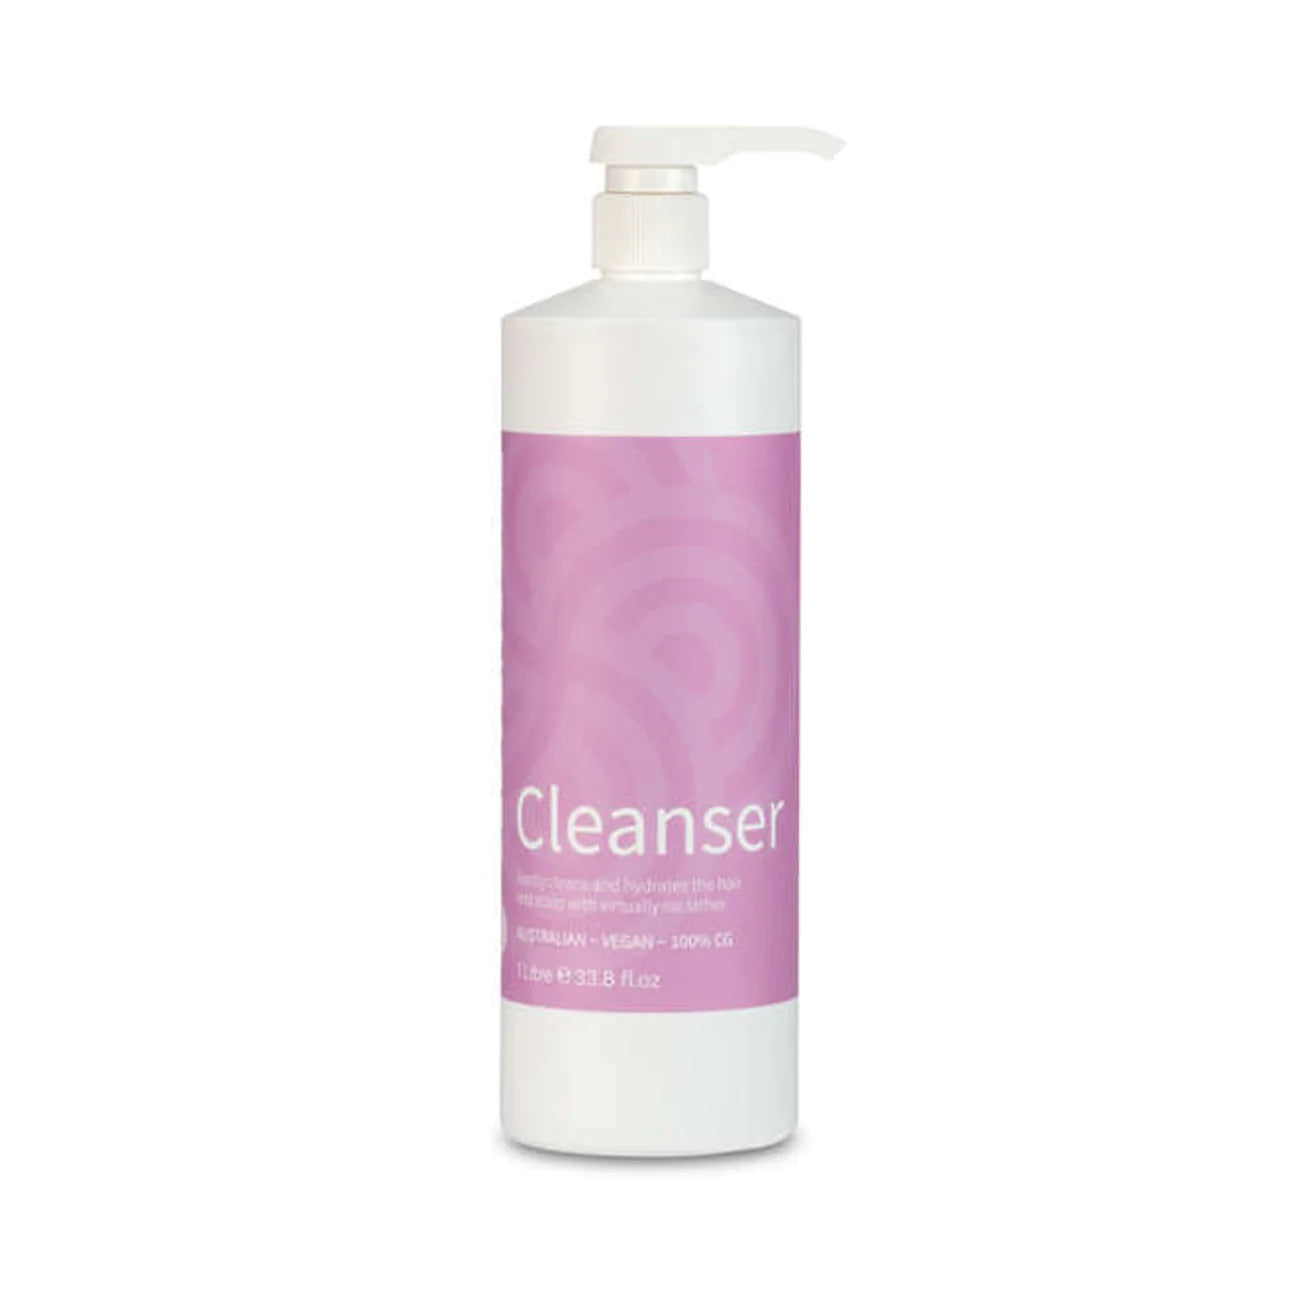 Clever Curl Cleanser - 1 Litre